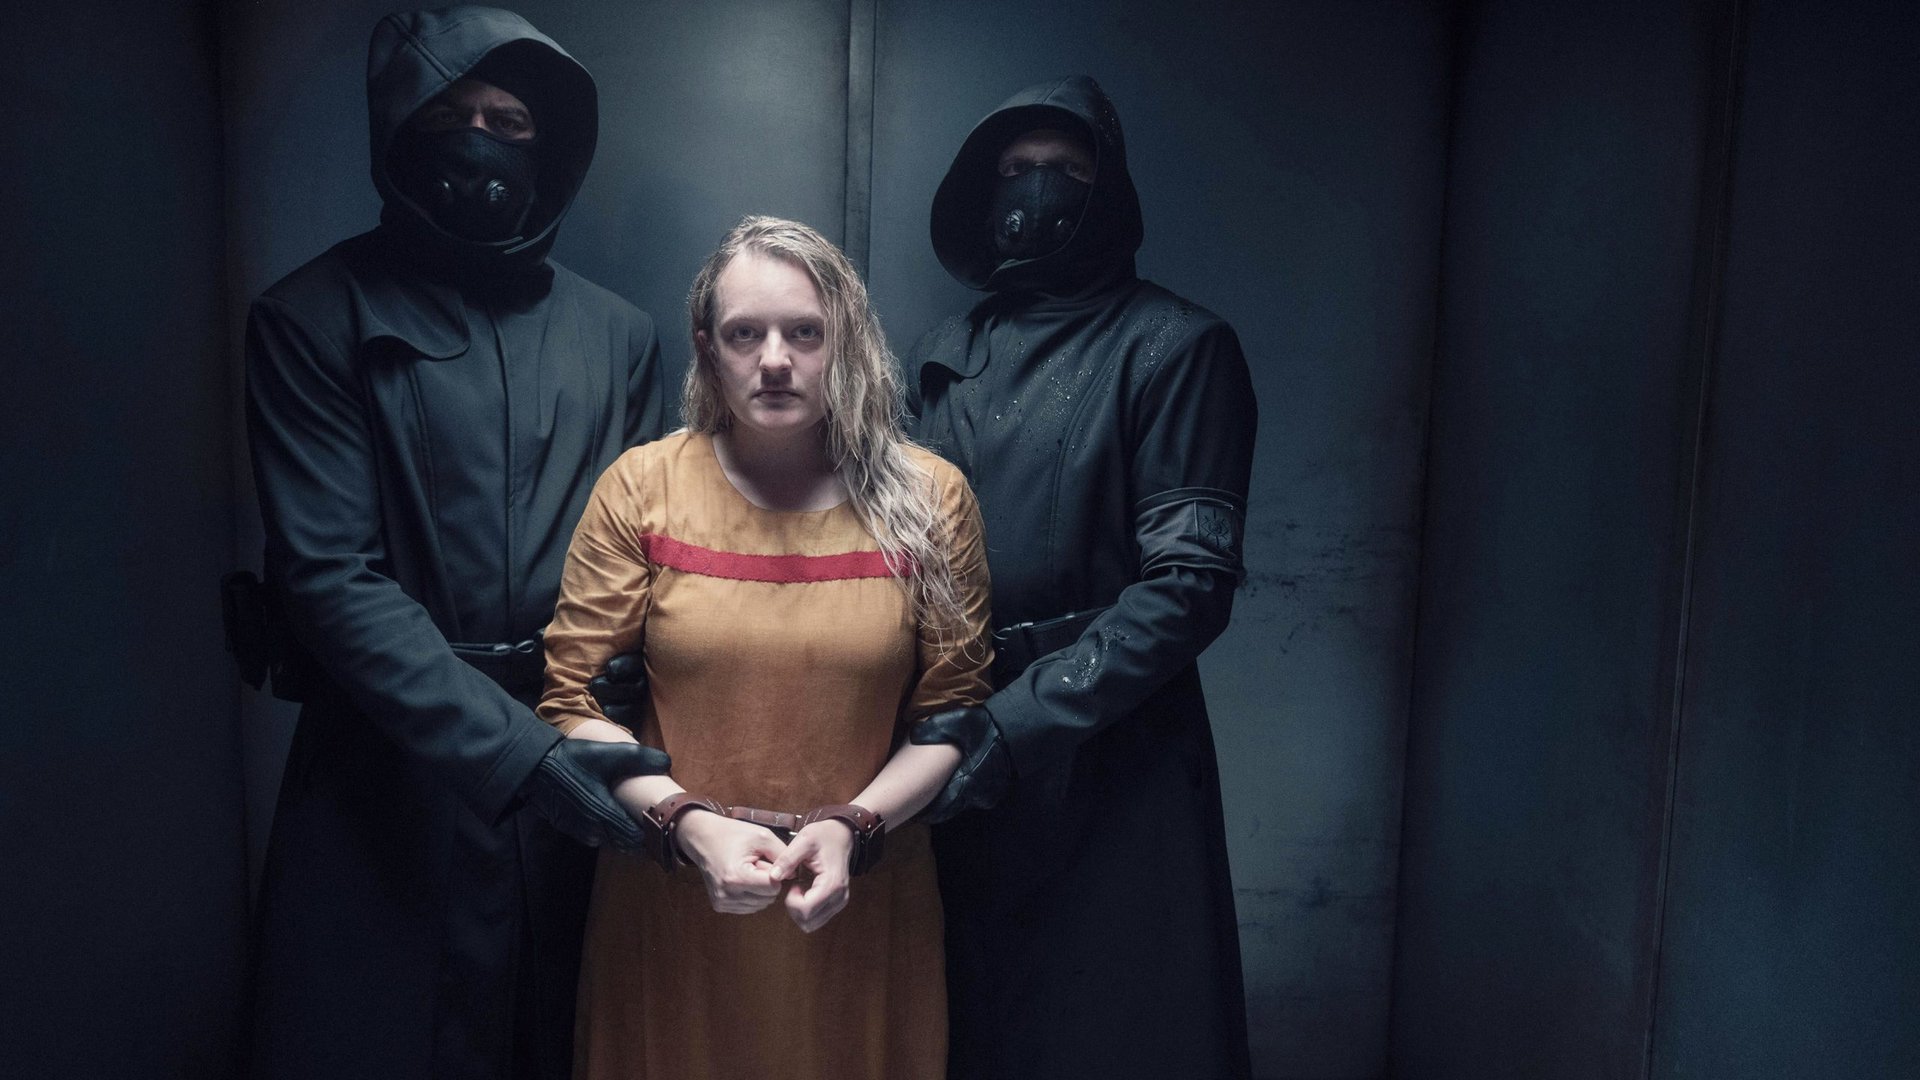 A woman is handcuffed by two masked men in The Handmaids Tale season 5 - new on Hulu